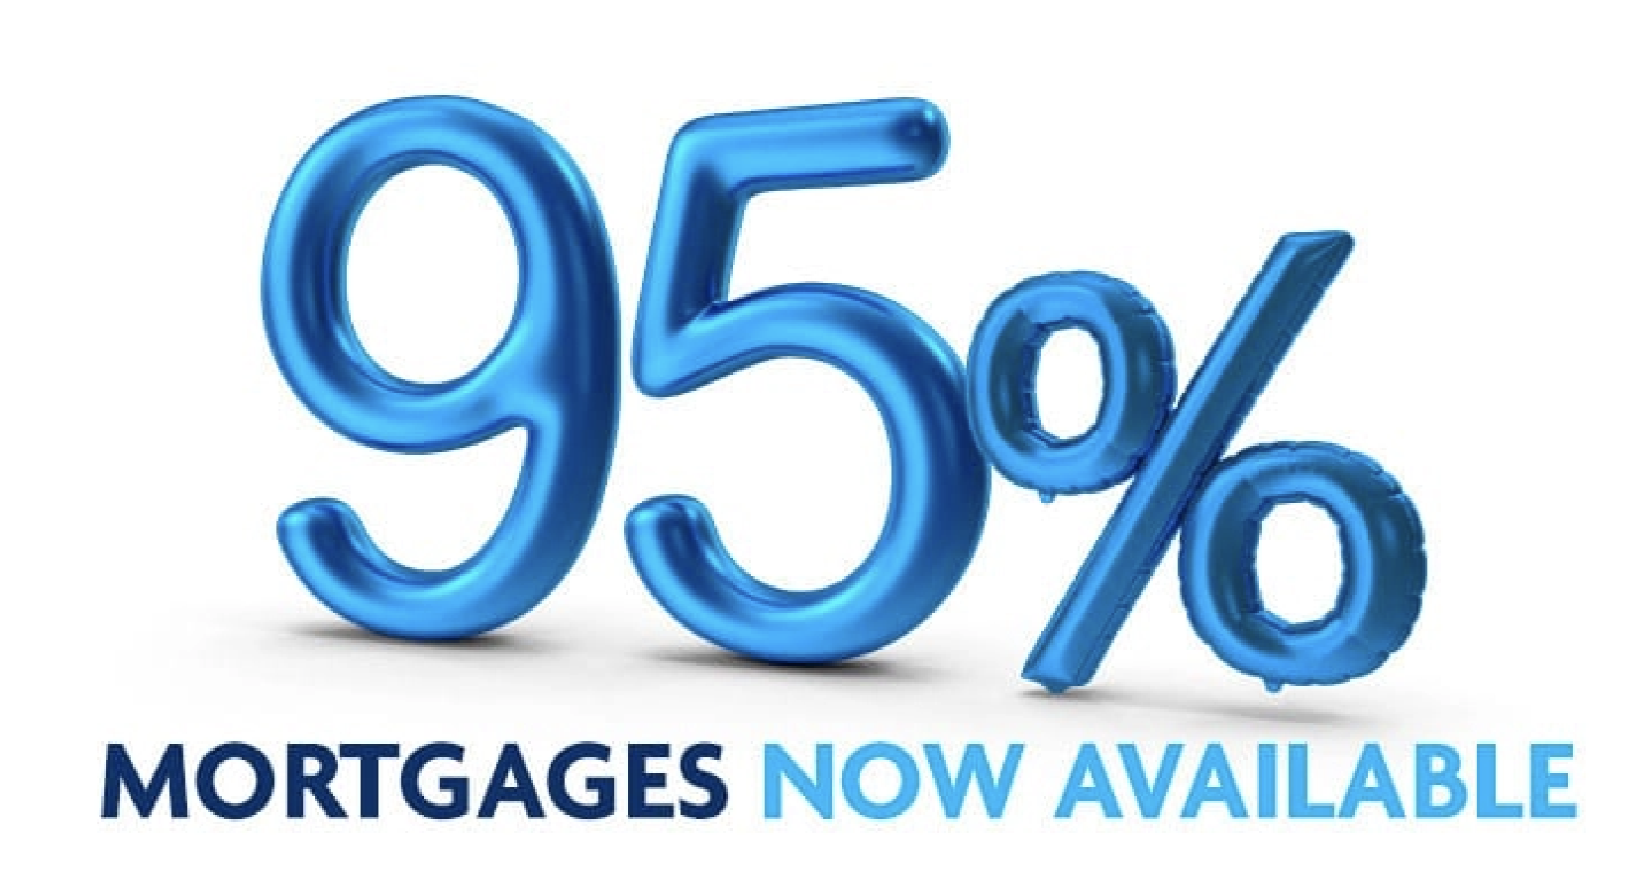 95% Mortgages Now Available